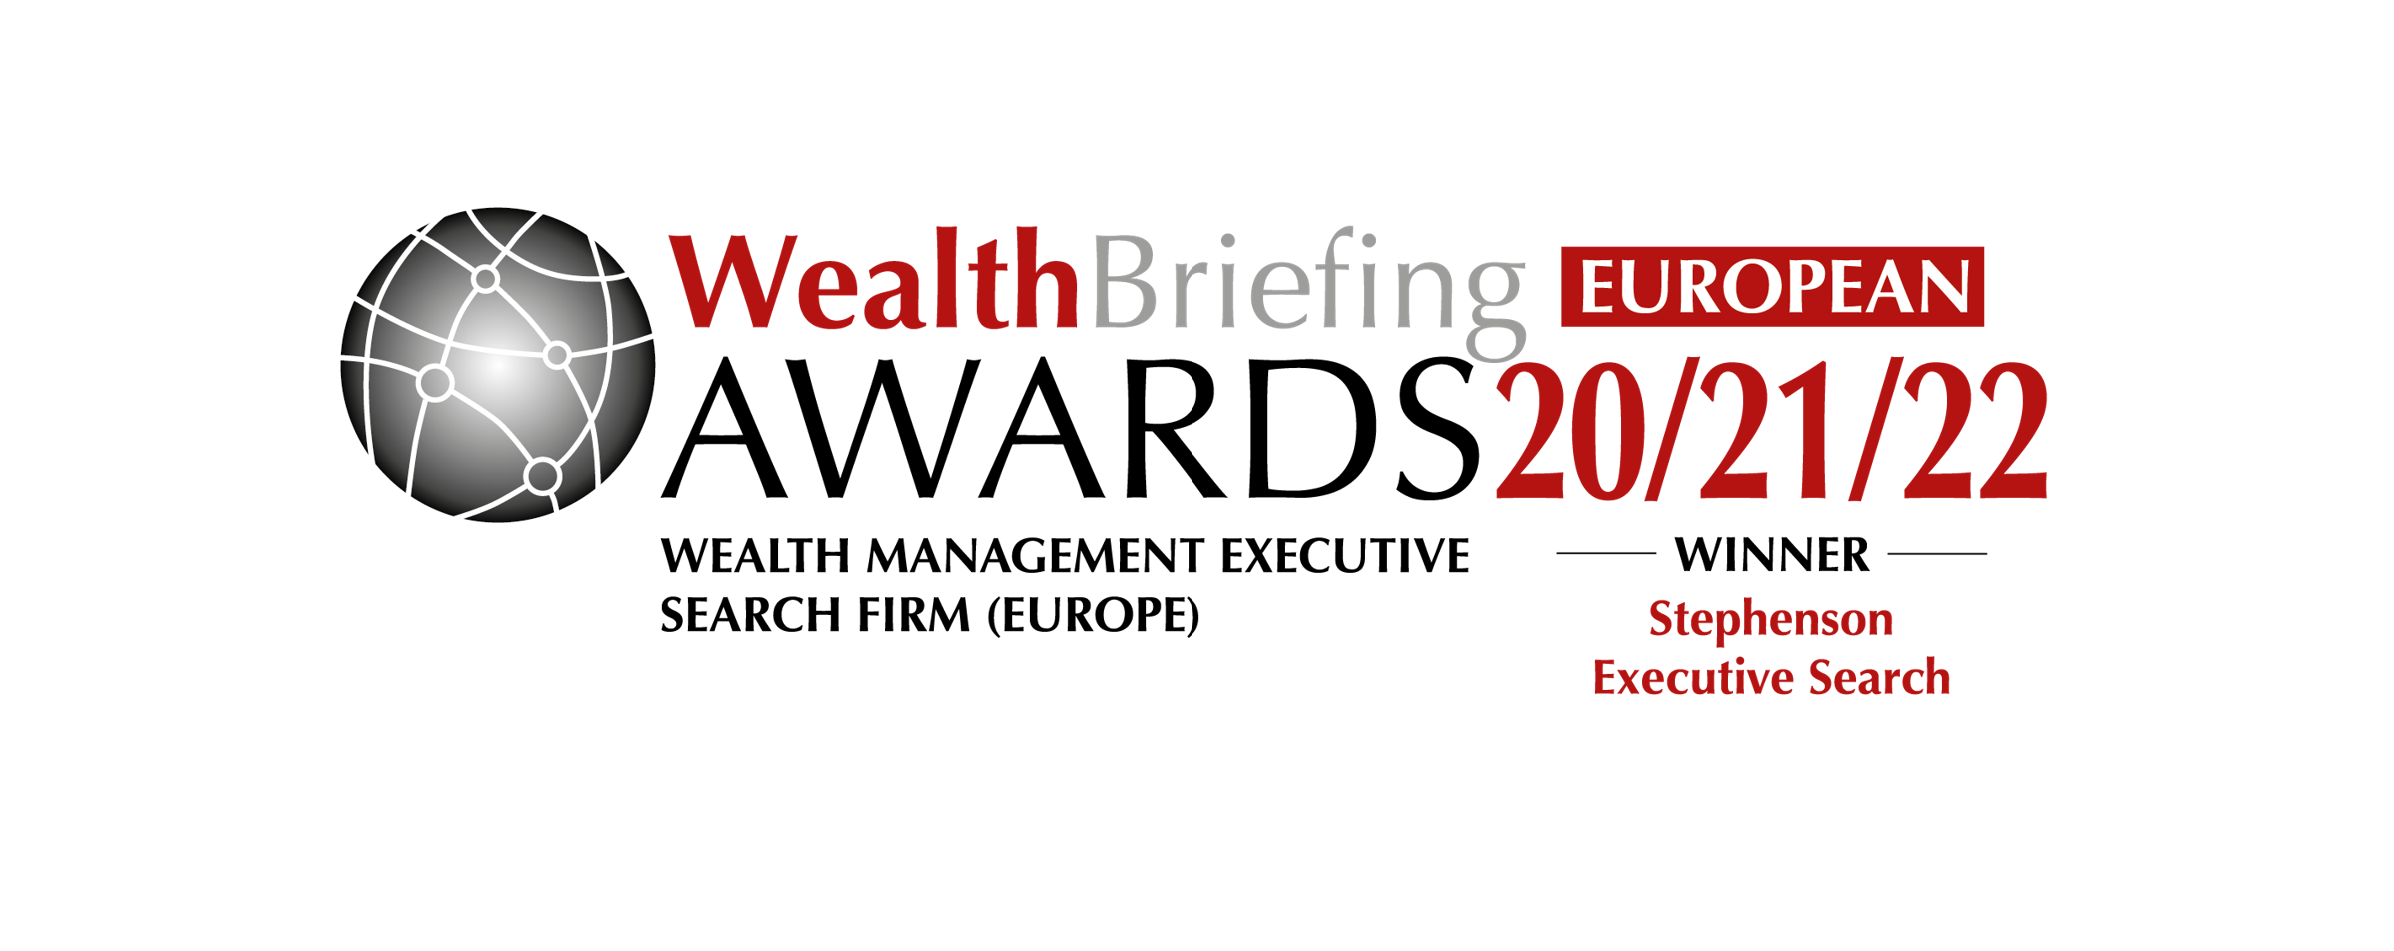 WealthBriefing European Awards – ” Best Wealth Management Executive Search Firm” 2022